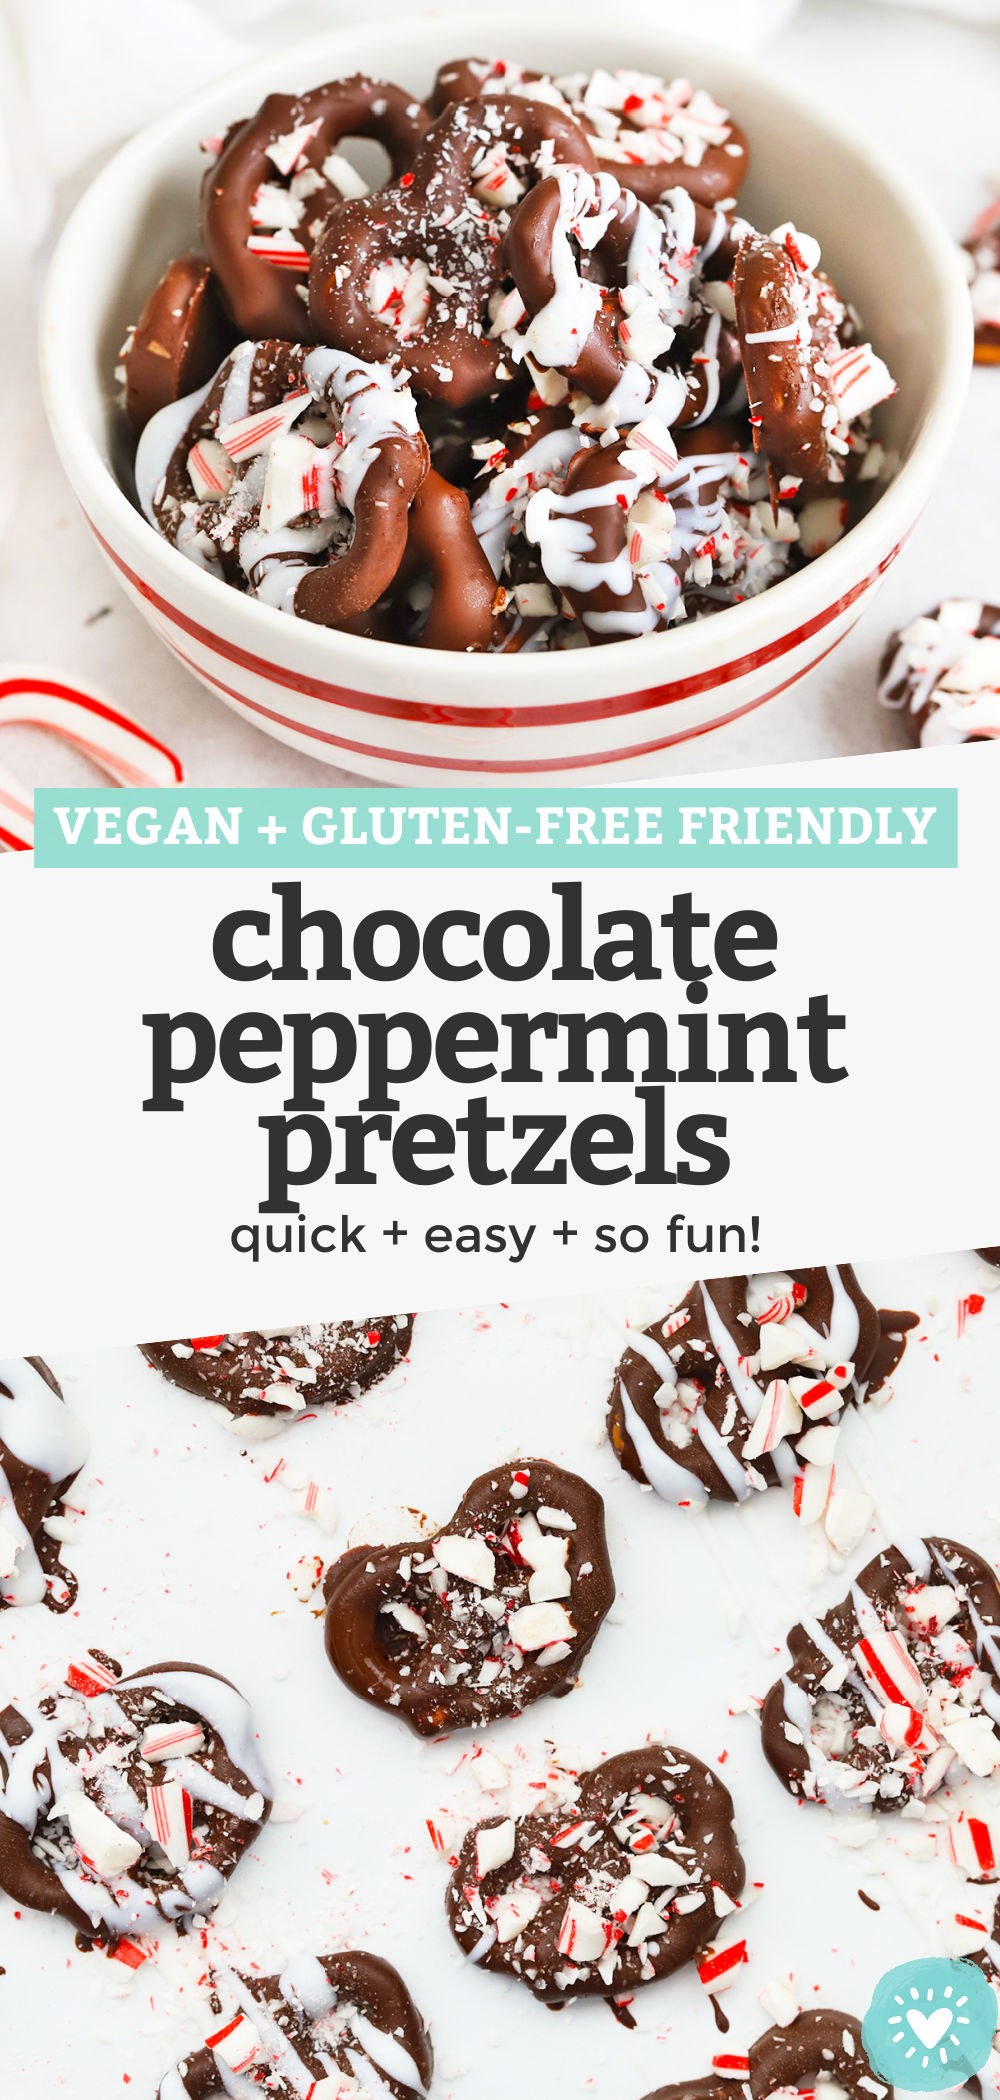 Gluten-Free Chocolate Peppermint Pretzels - These chocolate peppermint dipped pretzels only require 3 ingredients and 20-30 minutes to make. The easiest holiday treat around! (Gluten-Free + Vegan-Friendly) // Vegan Chocolate Peppermint Pretzels // Edible Holiday Gift // Food Gift Idea // Holiday Treat // Candy Cane Pretzels #glutenfree #dairyfree #vegan #dessert #chocolate #pretzels